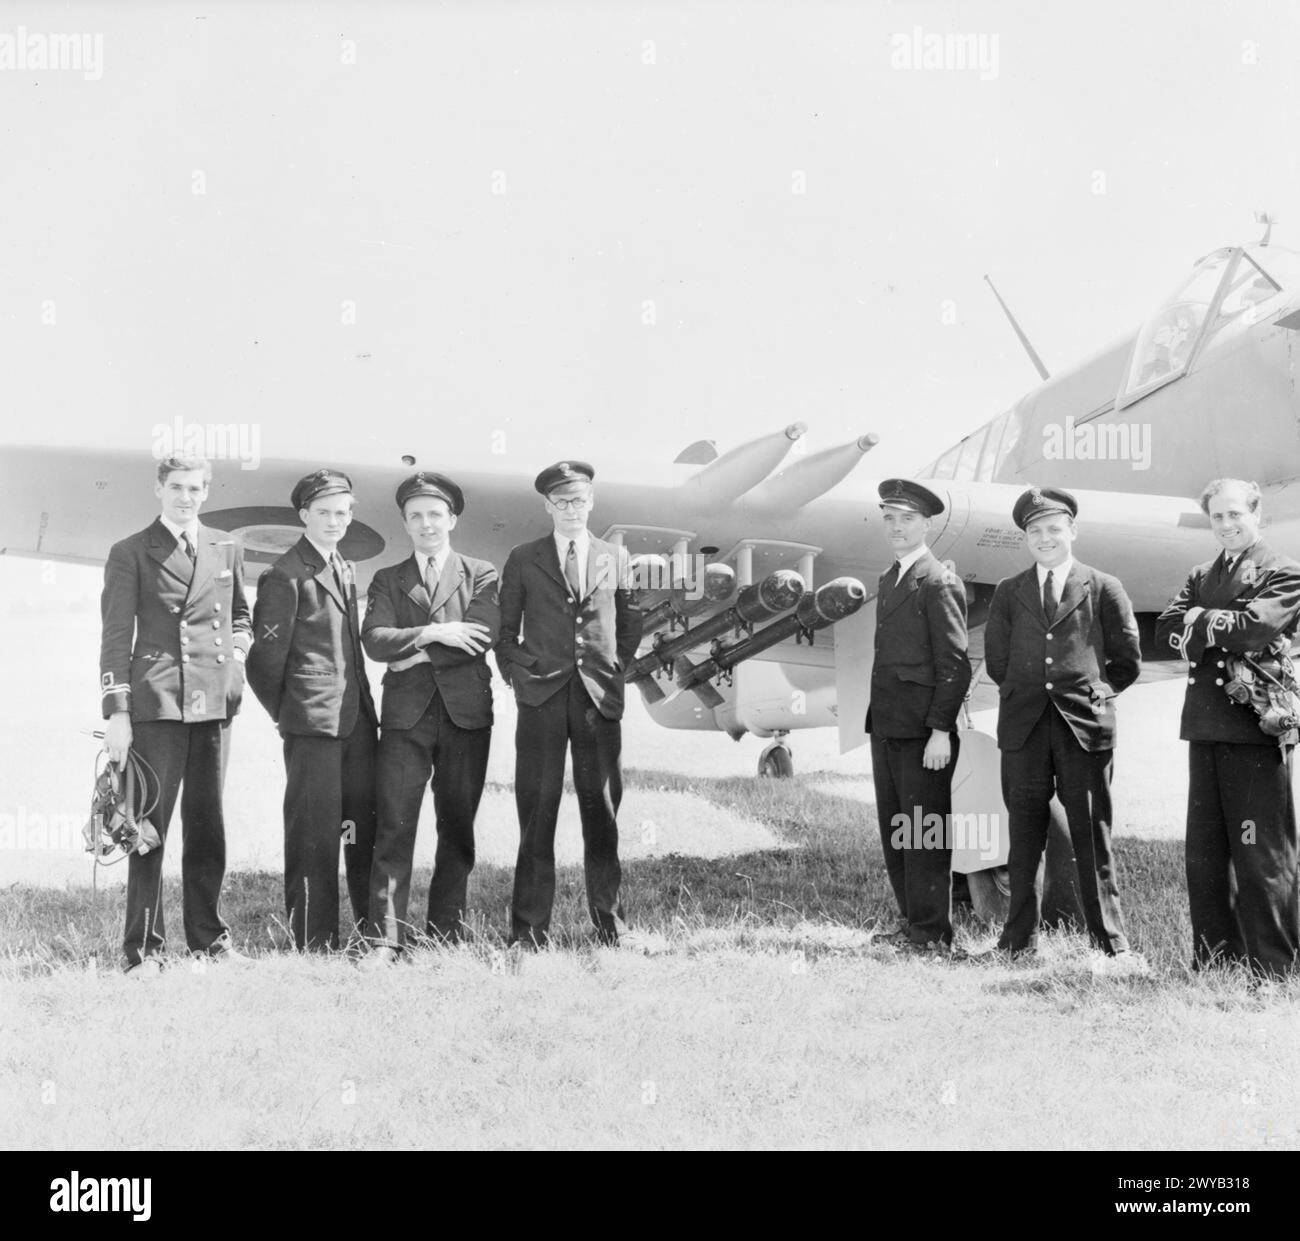 NAVAL FIGHTER ACES TO TOUR AMERICA. JUNE 1945, BEFORE-DEPARTURE PICTURES OF THE NAVAL PILOT, NAVIGATOR AND GROUND CREW OF THE FAIREY FIREFLY TWO-SEATER RECONNAISSANCE PLANE WHICH THEY ARE TAKING TO THE USA FOR PURPOSES OF DEMONSTRATION AND INSTRUCTION. - The Fairey team; pilot, navigator and ground crew. Left to right: Lieut R G Armitage, DFC, RNVR, navigator; AF (O) H Brown; AF (L) S Kirkman; Pilot R M T J Marriott; LAF (E) R Howell; AA4 J F Bunker; Lieut D R Owen Price, DFC, RNVR, Pilot. , Stock Photo